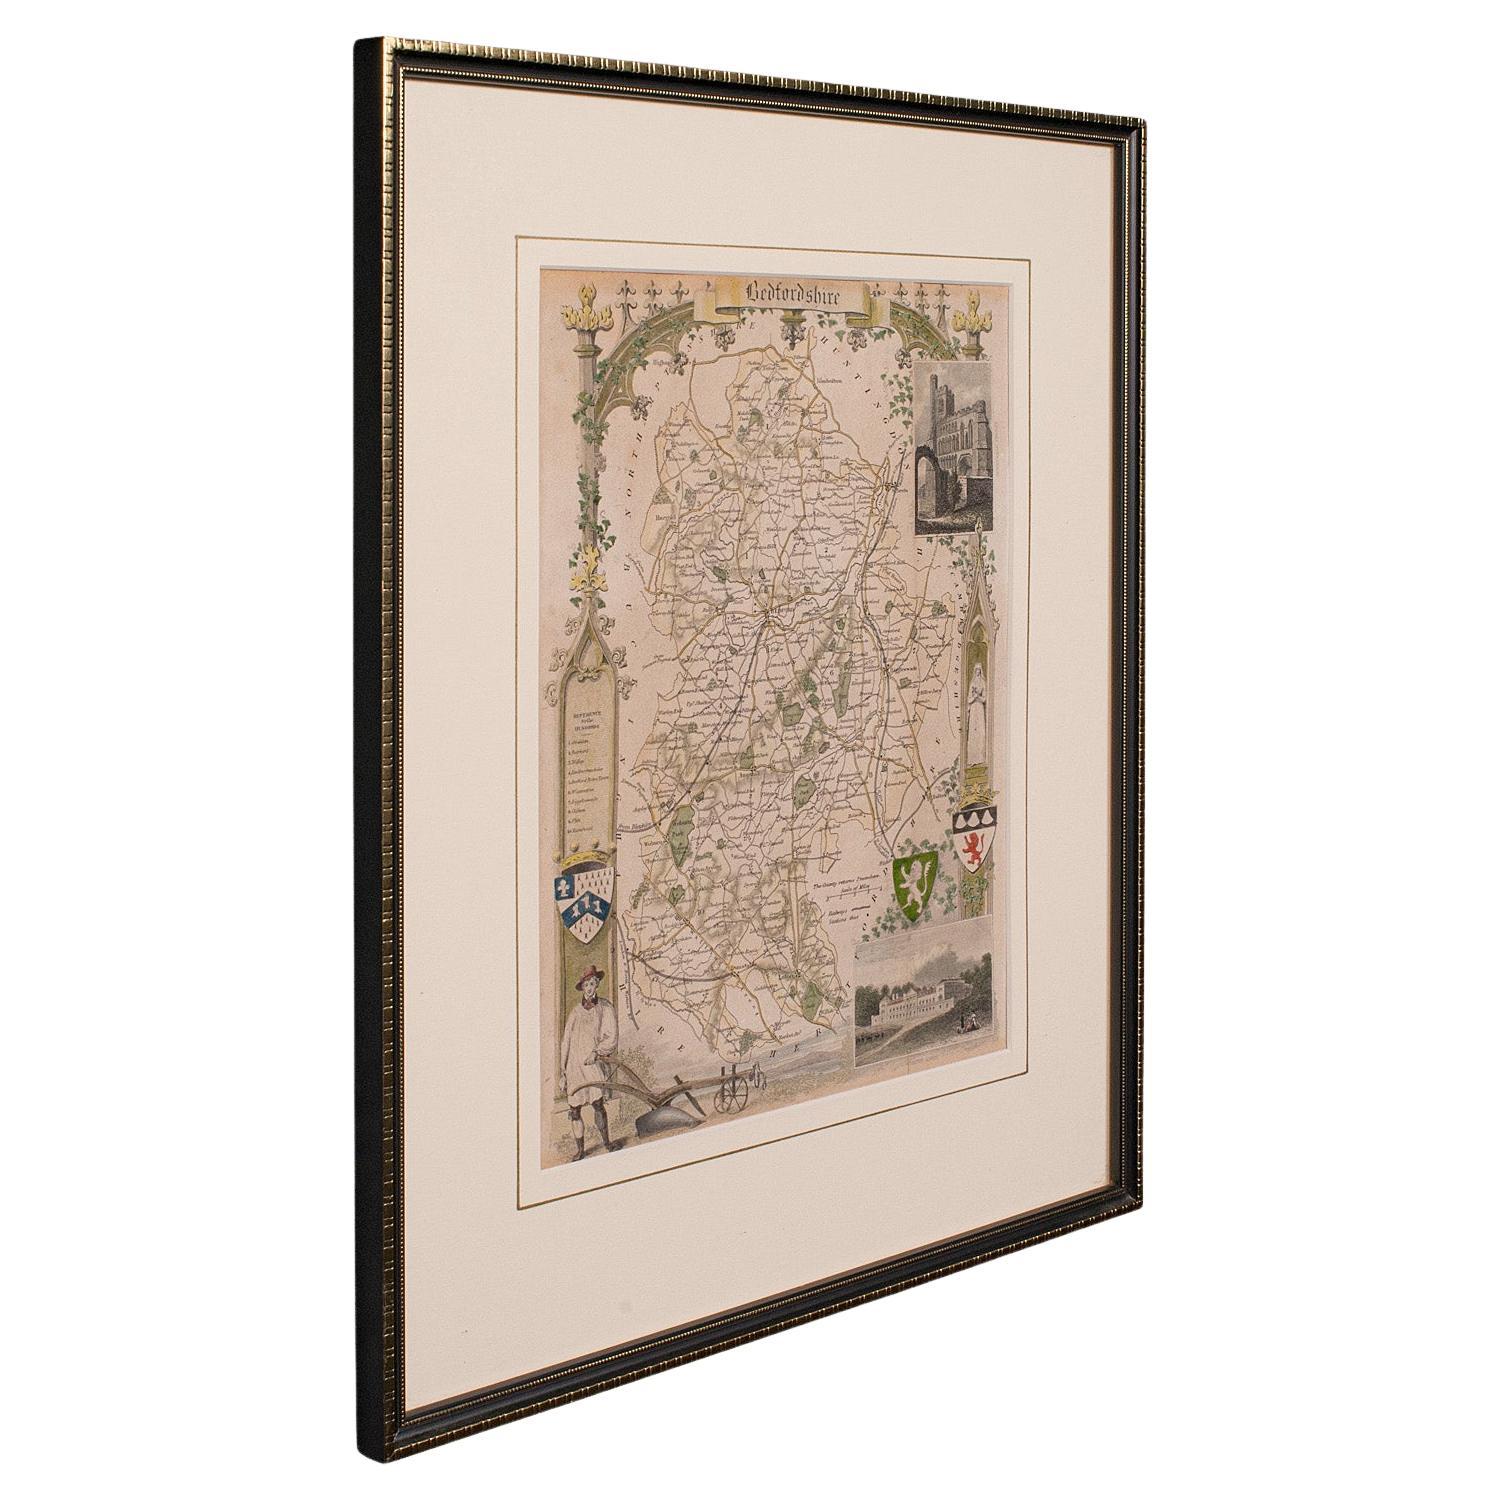 Antique Lithography Map, Bedfordshire, English, Framed Engraving, Cartography For Sale